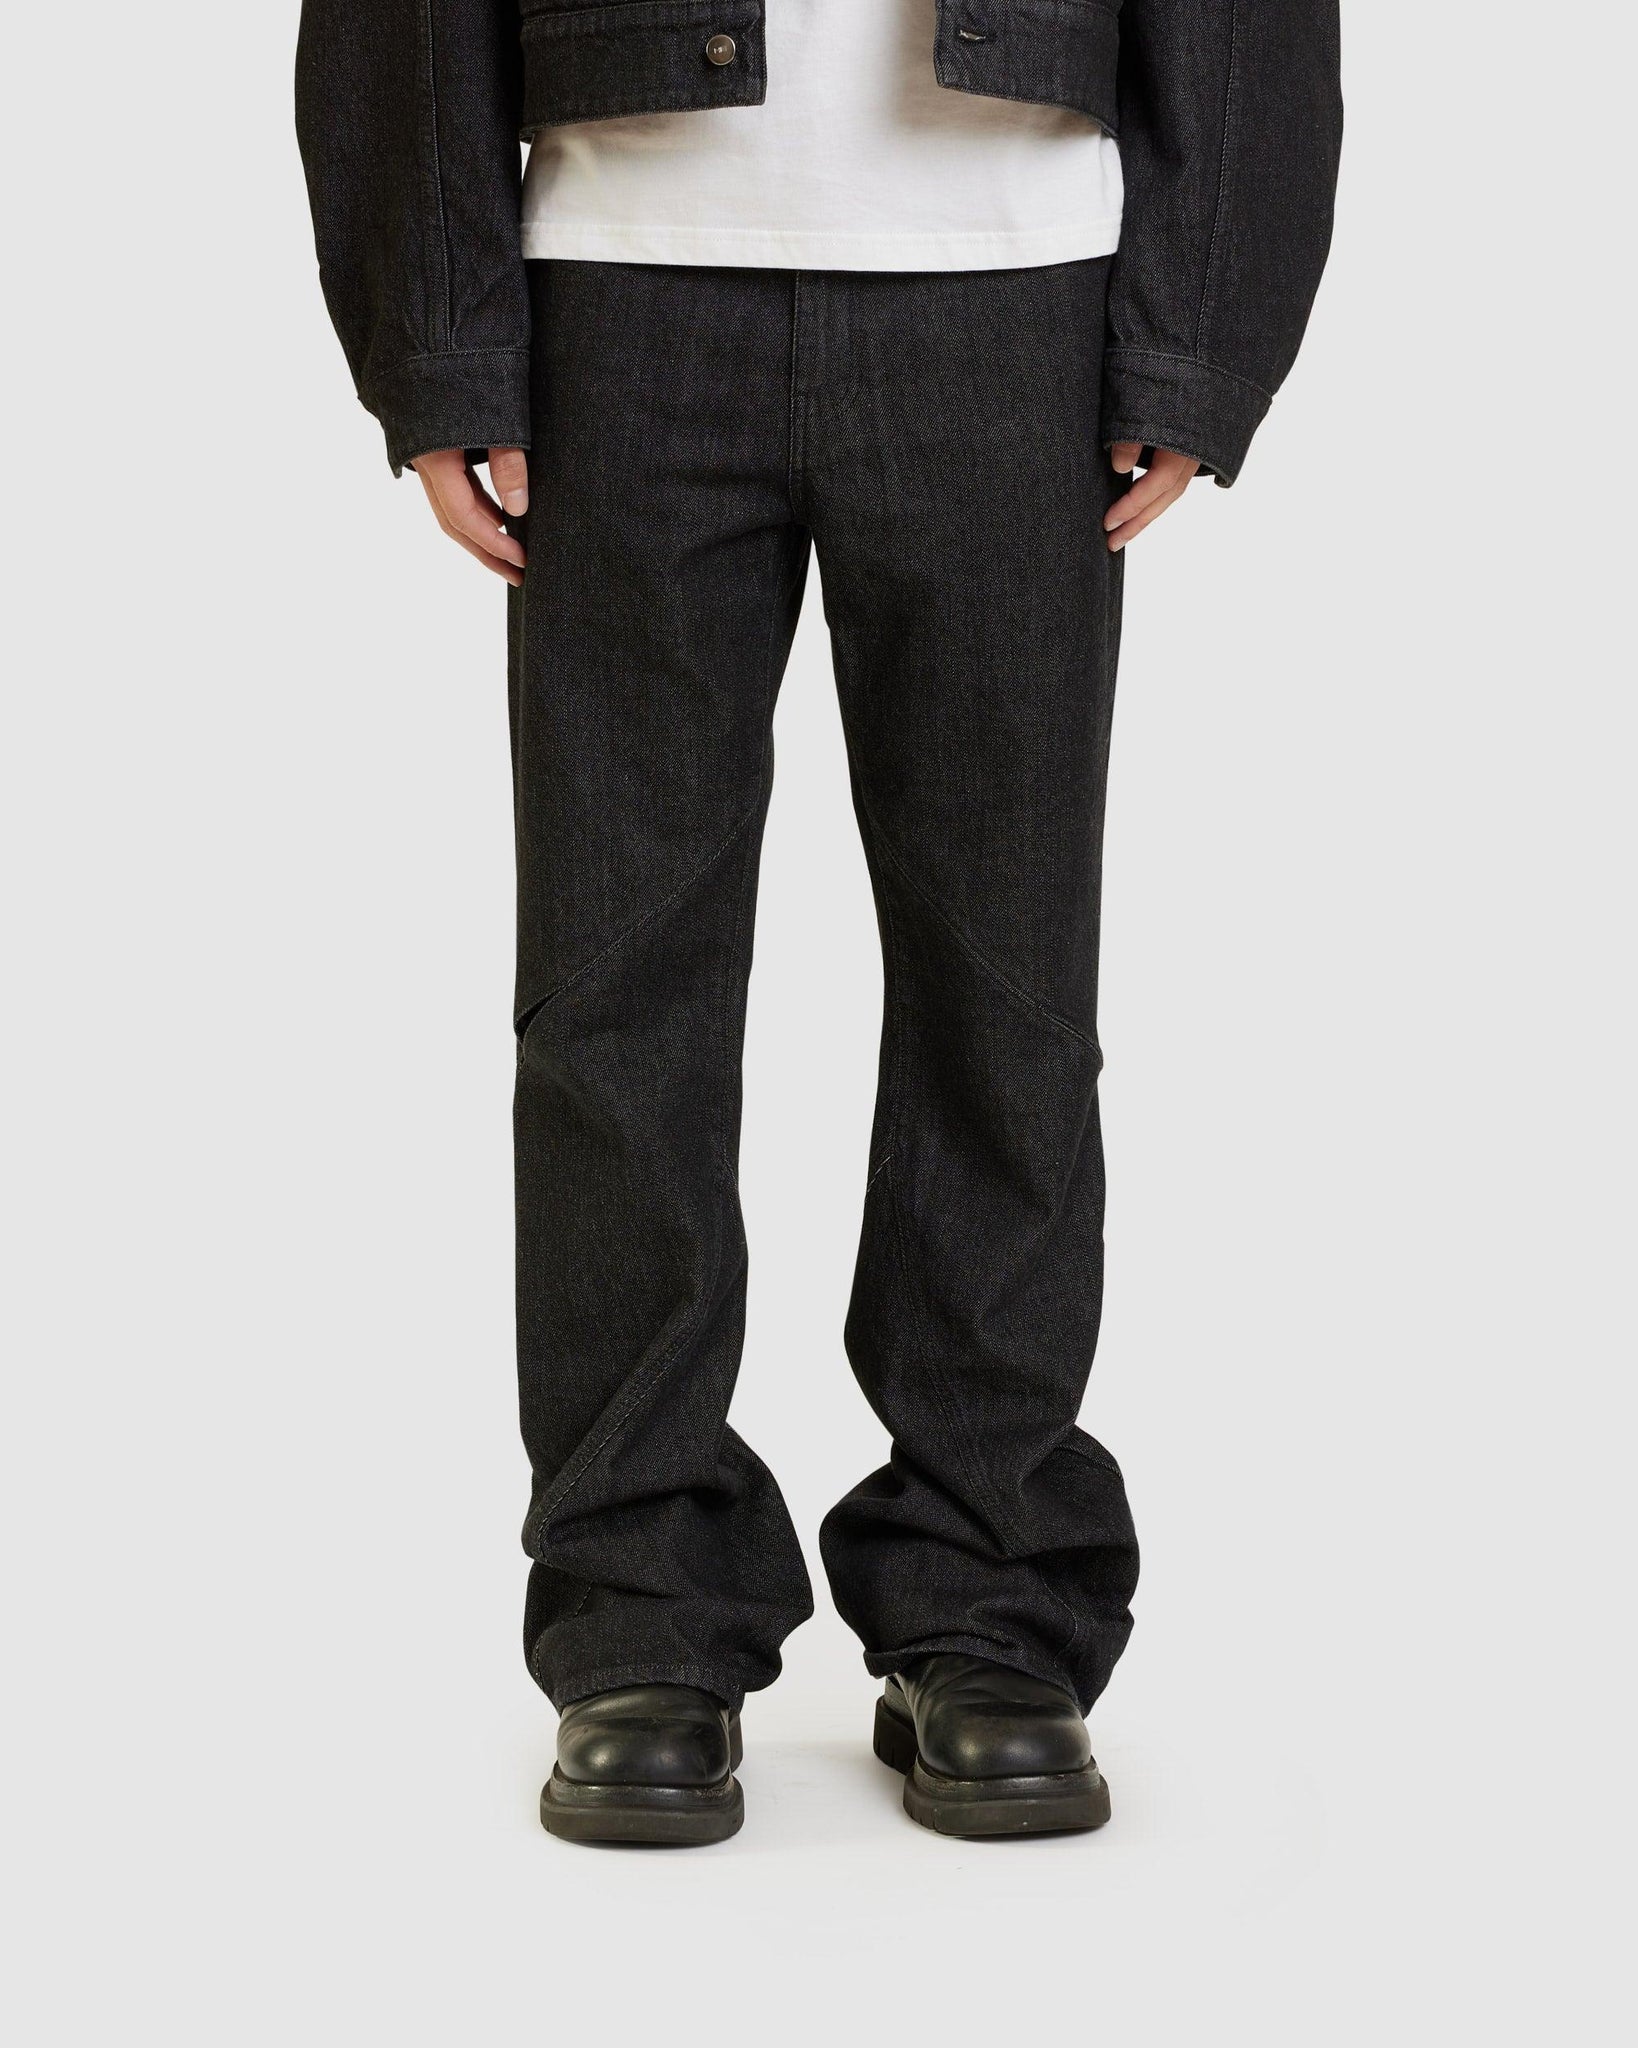 Eutrophic Denim Trousers - {{ collection.title }} - Chinatown Country Club 